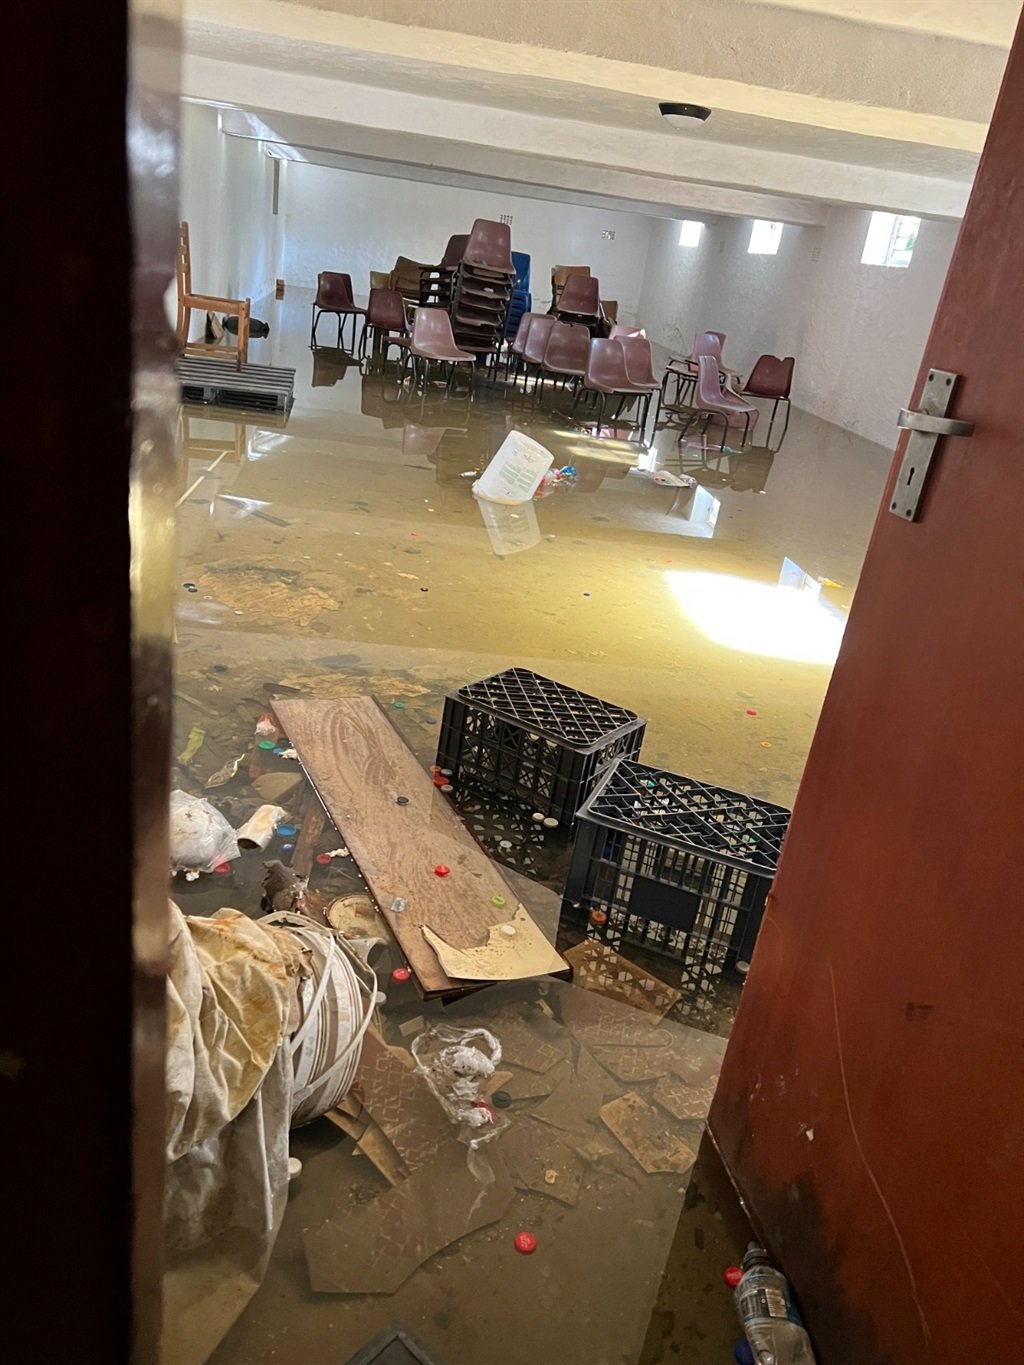 Western Cape Education MEC David Maynier visited Franschhoek High School on Wednesday to assess the damage caused by floods. 